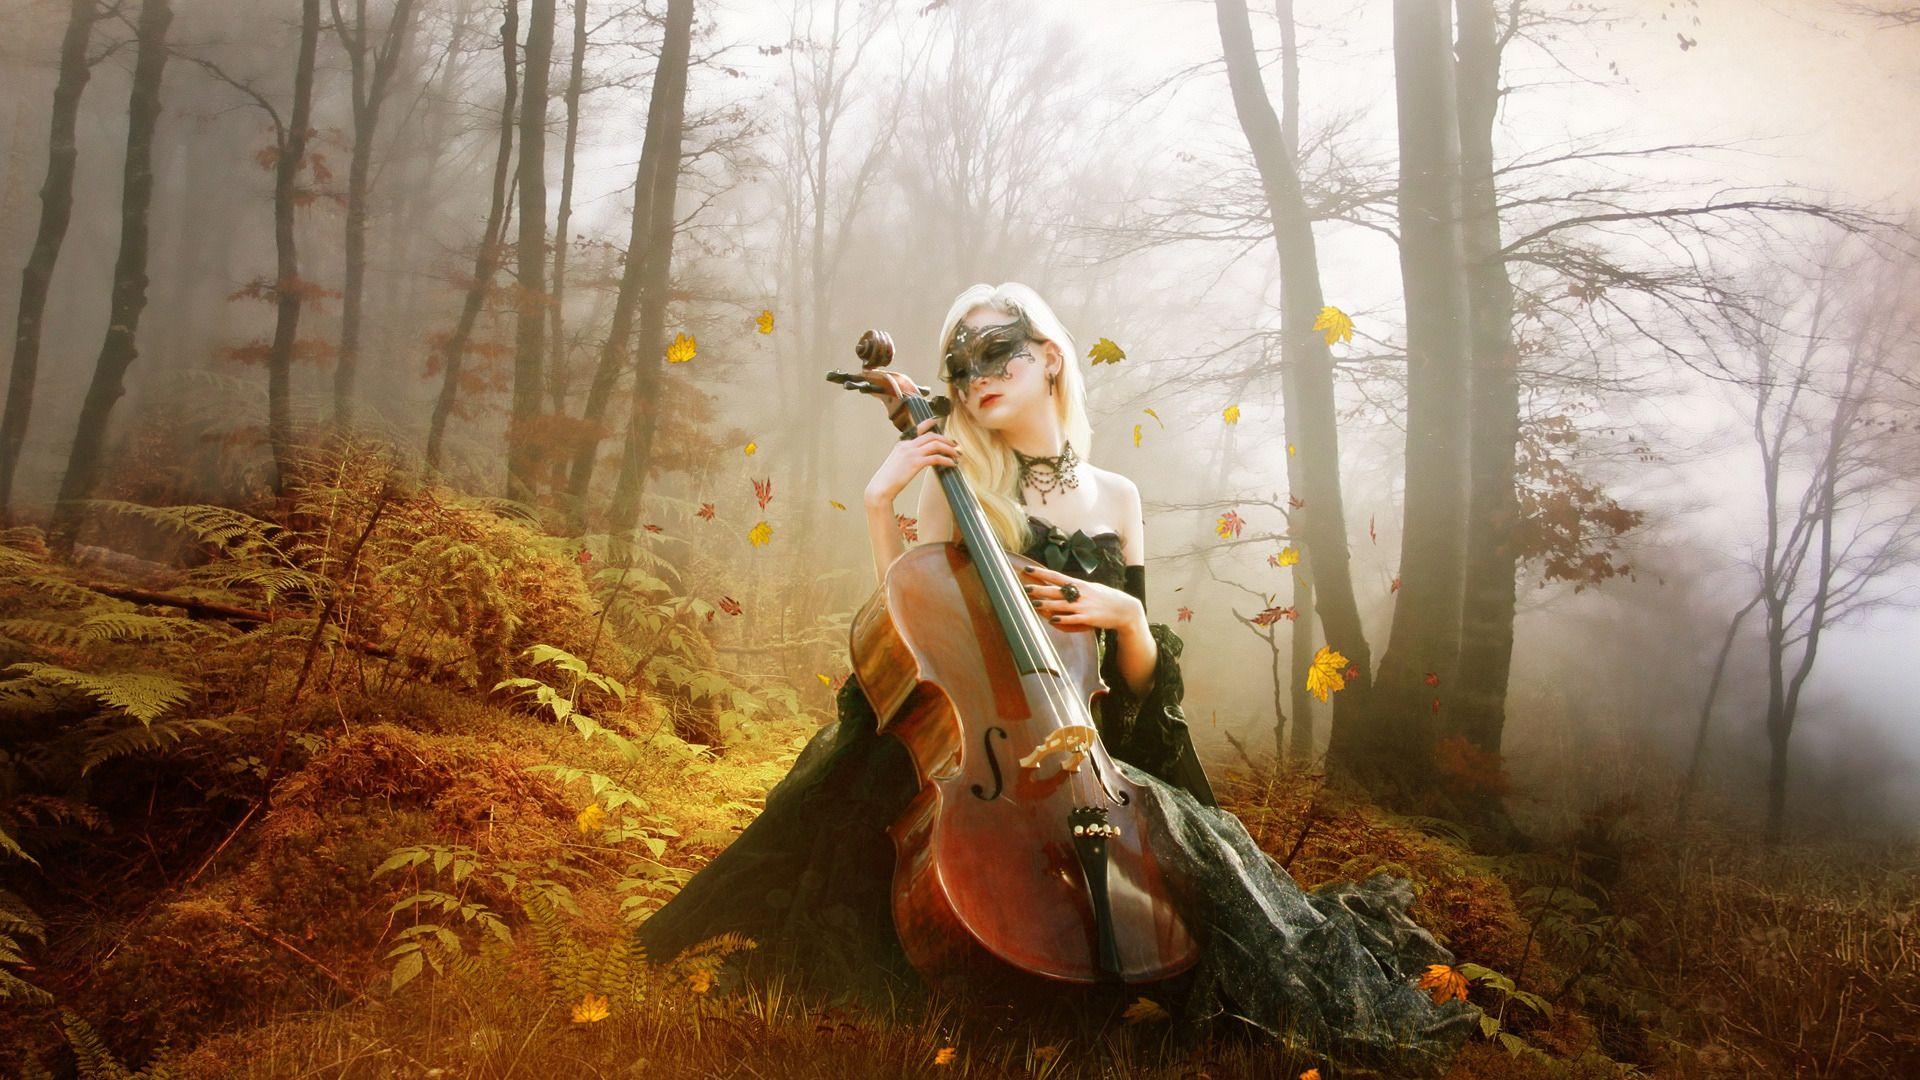 Wallpaper.wiki Cool Cello Background PIC WPC007347